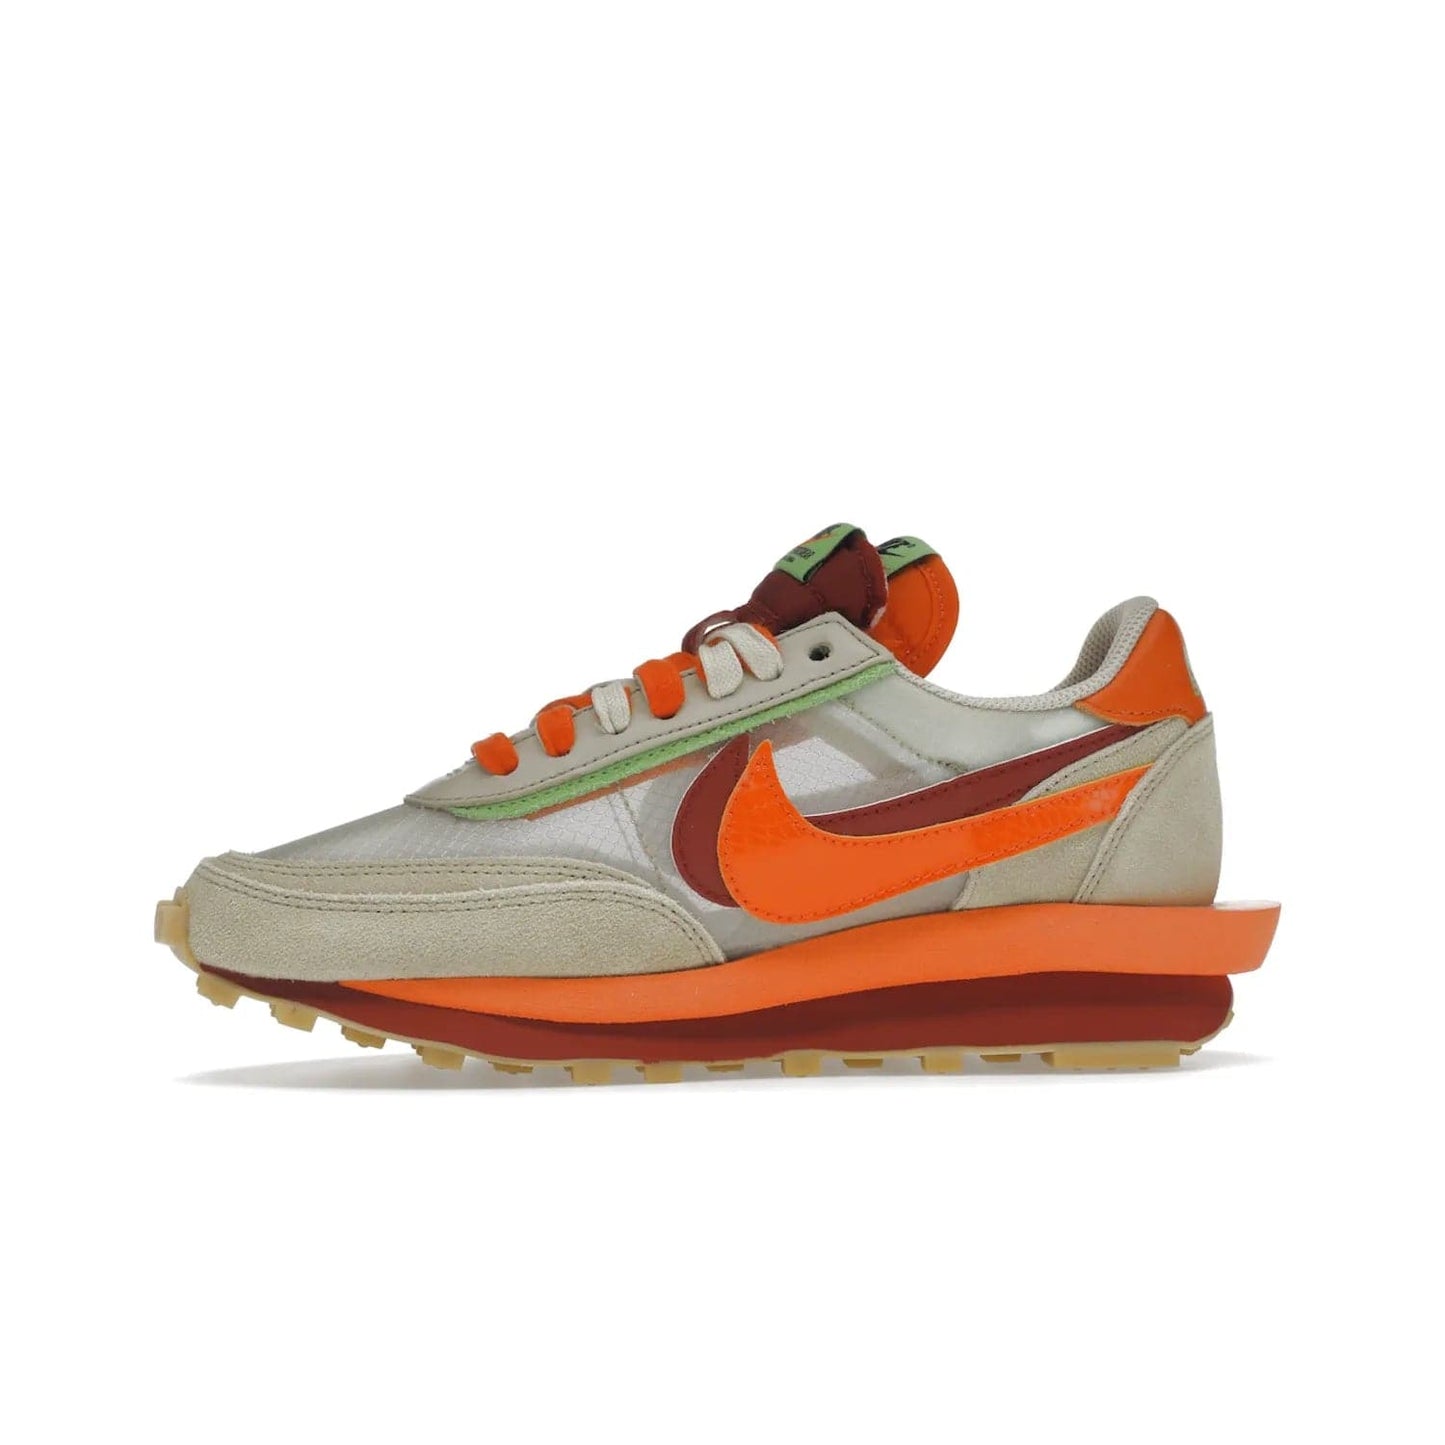 Nike LD Waffle sacai CLOT Kiss of Death Net Orange Blaze - Image 18 - Only at www.BallersClubKickz.com - A bold and stylish Nike LD Waffle sacai CLOT Kiss of Death Net Orange Blaze sneaker featuring a unique off-white, Deep Red & Orange Blaze Swooshes, two-toned stacked sole and doubled tongue. Available in September 2021. Make a statement.